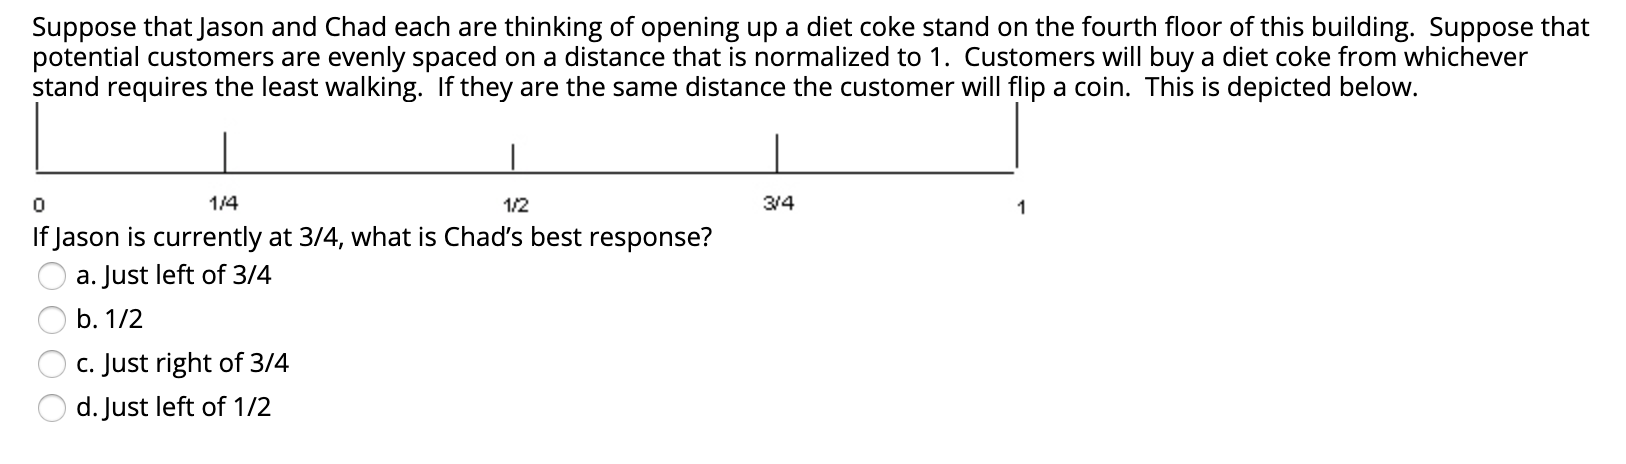 Suppose that Jason and Chad each are thinking of opening up a diet coke stand on the fourth floor of this building. Suppose that
potential customers are evenly spaced on a distance that is normalized to 1. Customers will buy a diet coke from whichever
stand requires the least walking. If they are the same distance the customer will flip a coin. This is depicted below.
1/4
1/2
3/4
If Jason is currently at 3/4, what is Chad's best response?
a. Just left of 3/4
b. 1/2
c. Just right of 3/4
d. Just left of 1/2
